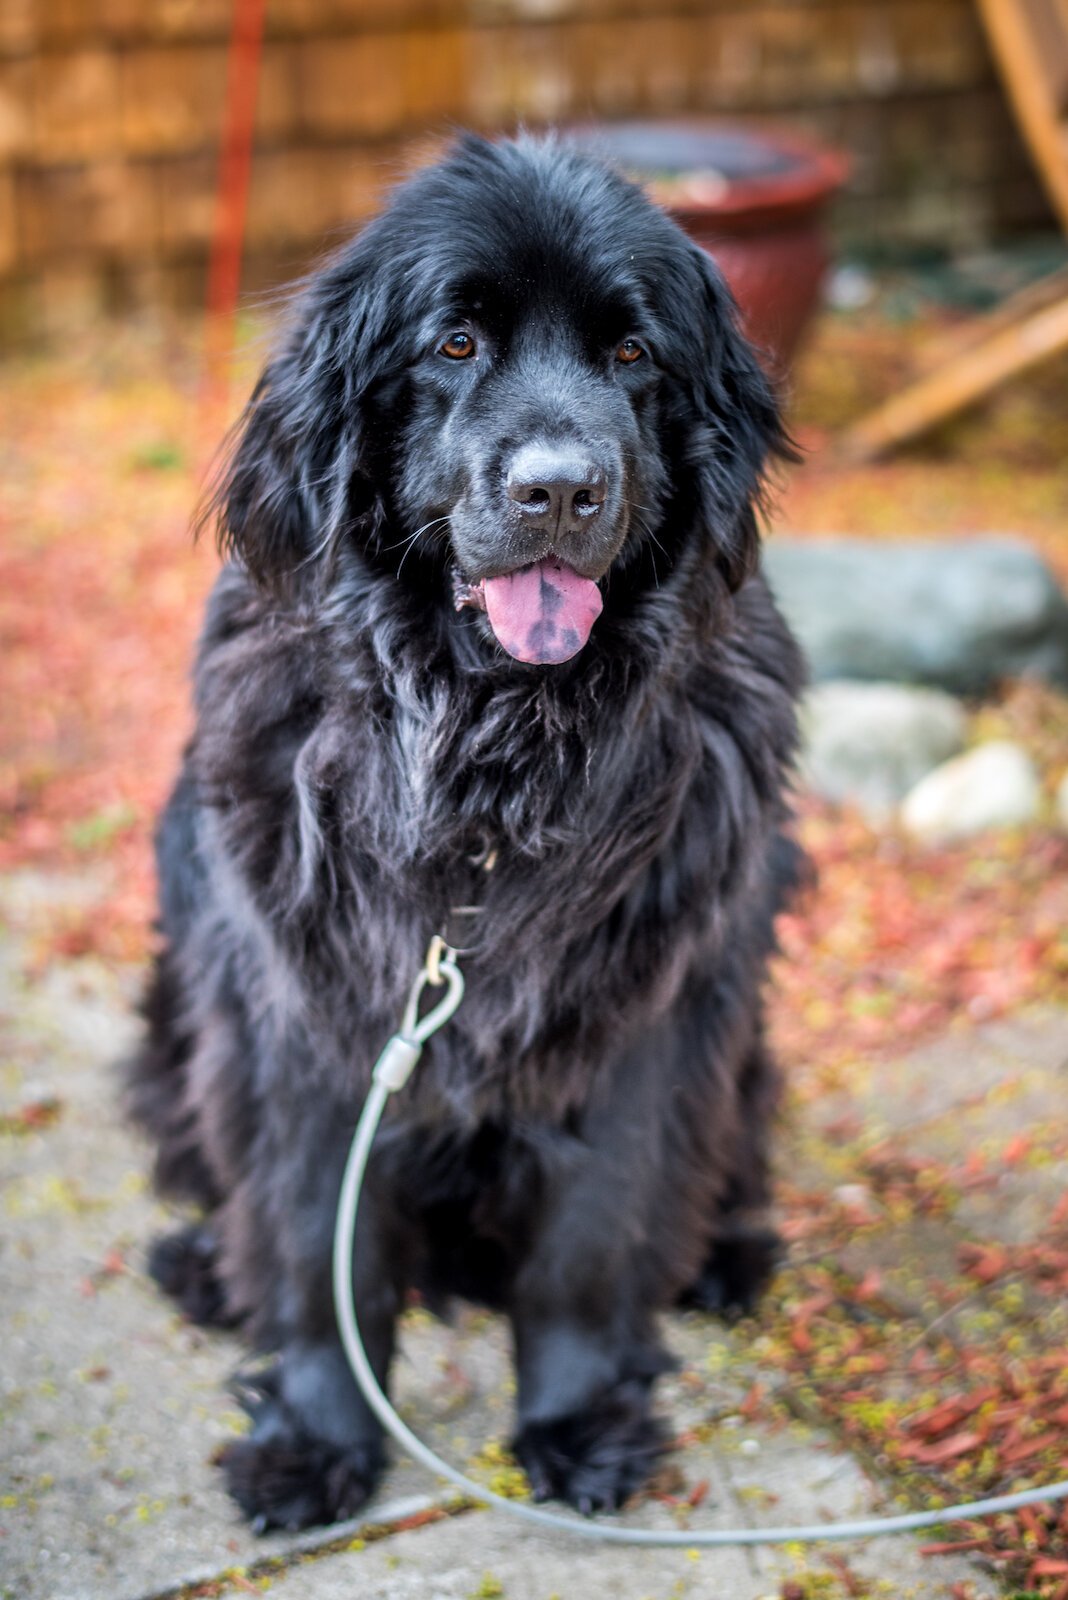 Gus, a Newfoundland dog in the neighborhood is owned by Jean Ogilvie.